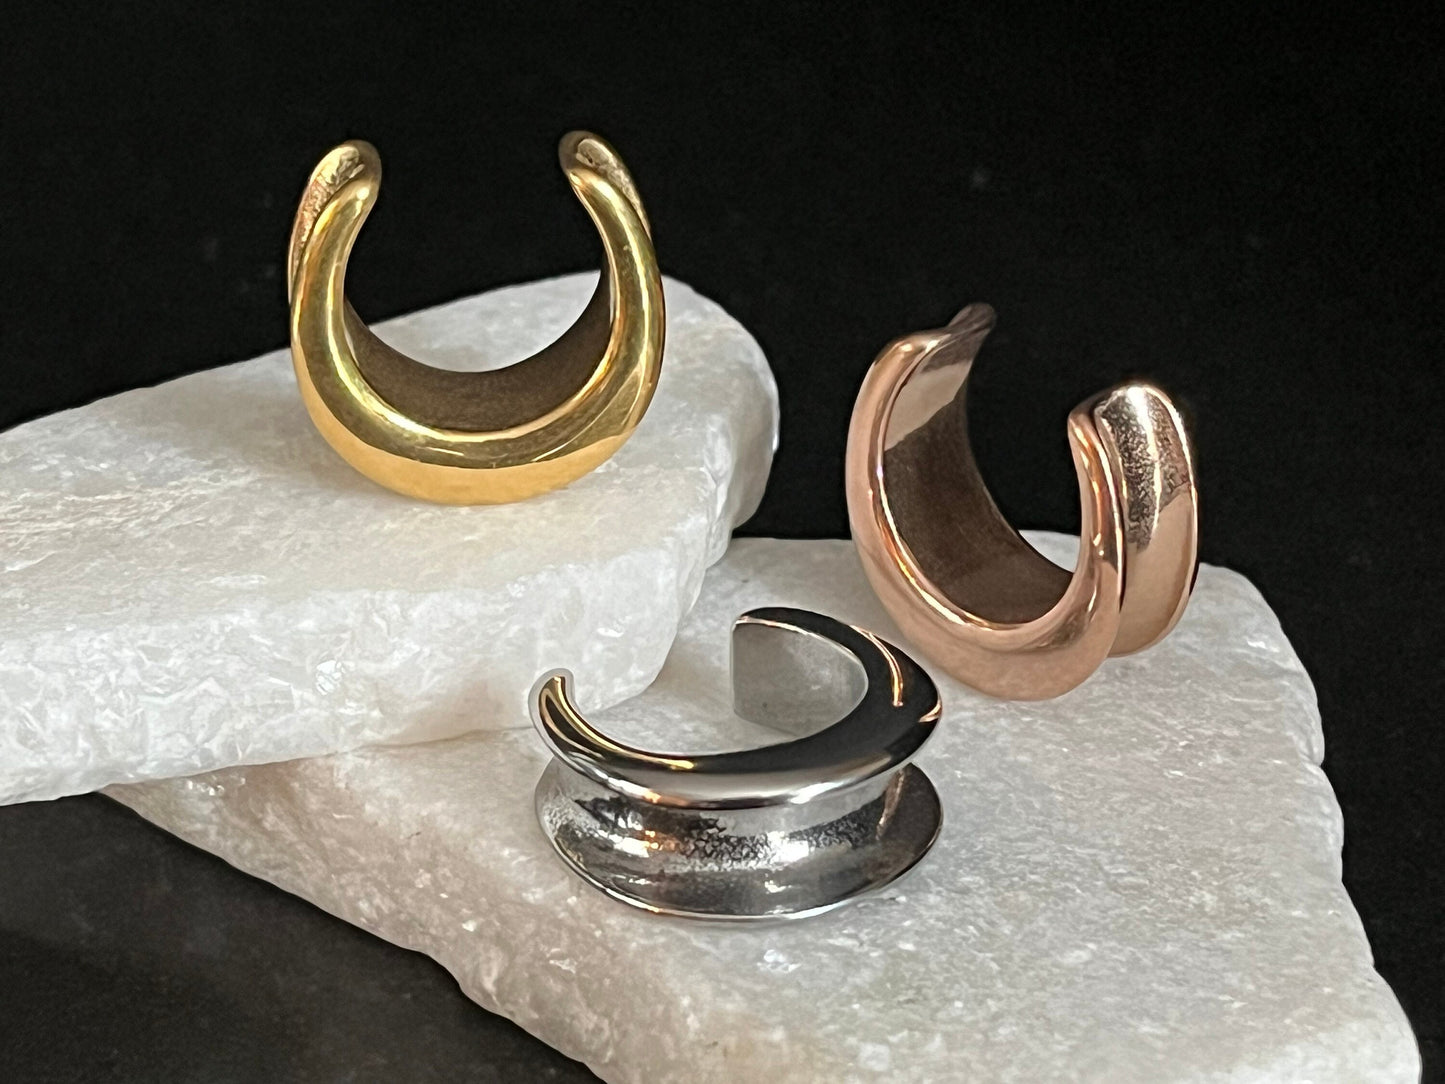 Pair of Stunning Gold Saddle Surgical Steel Ear Spreaders Hanger-Tunnels/Plugs - Gauges 00g (10mm) thru 1" (25mm) available!